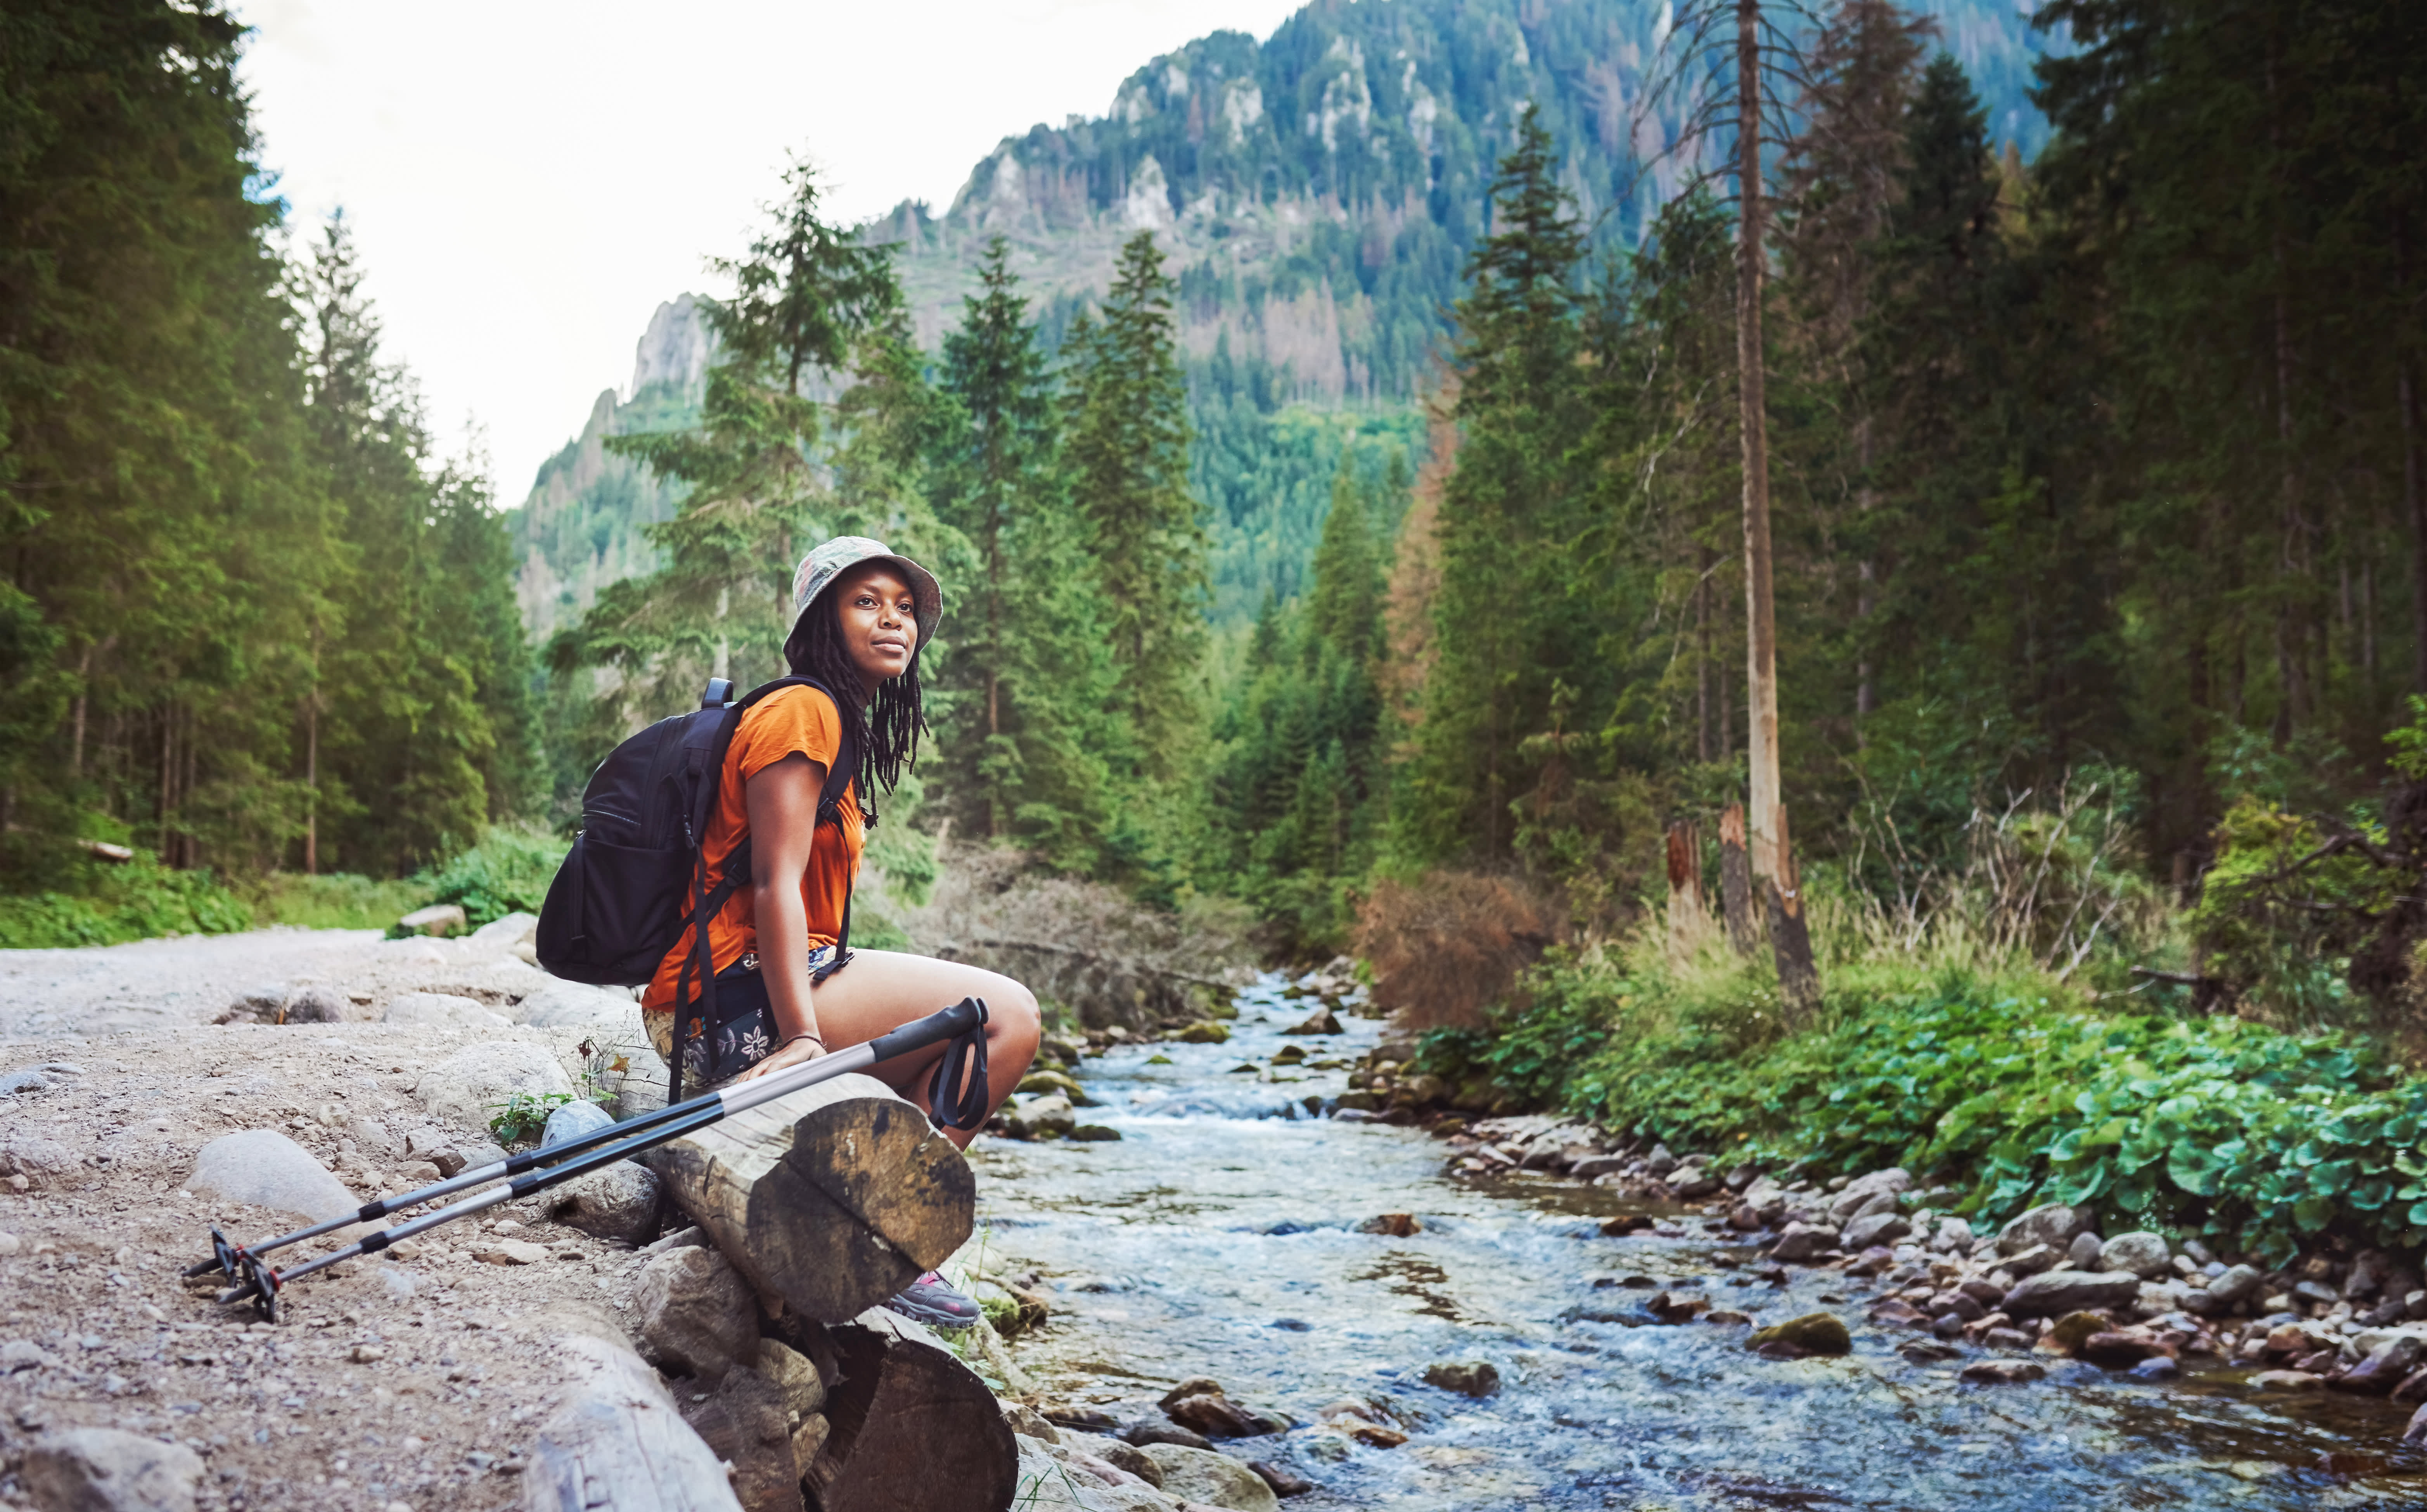 Summer Hiking: A Guide That Won't Leave You Absolutely Miserable – LIVSN